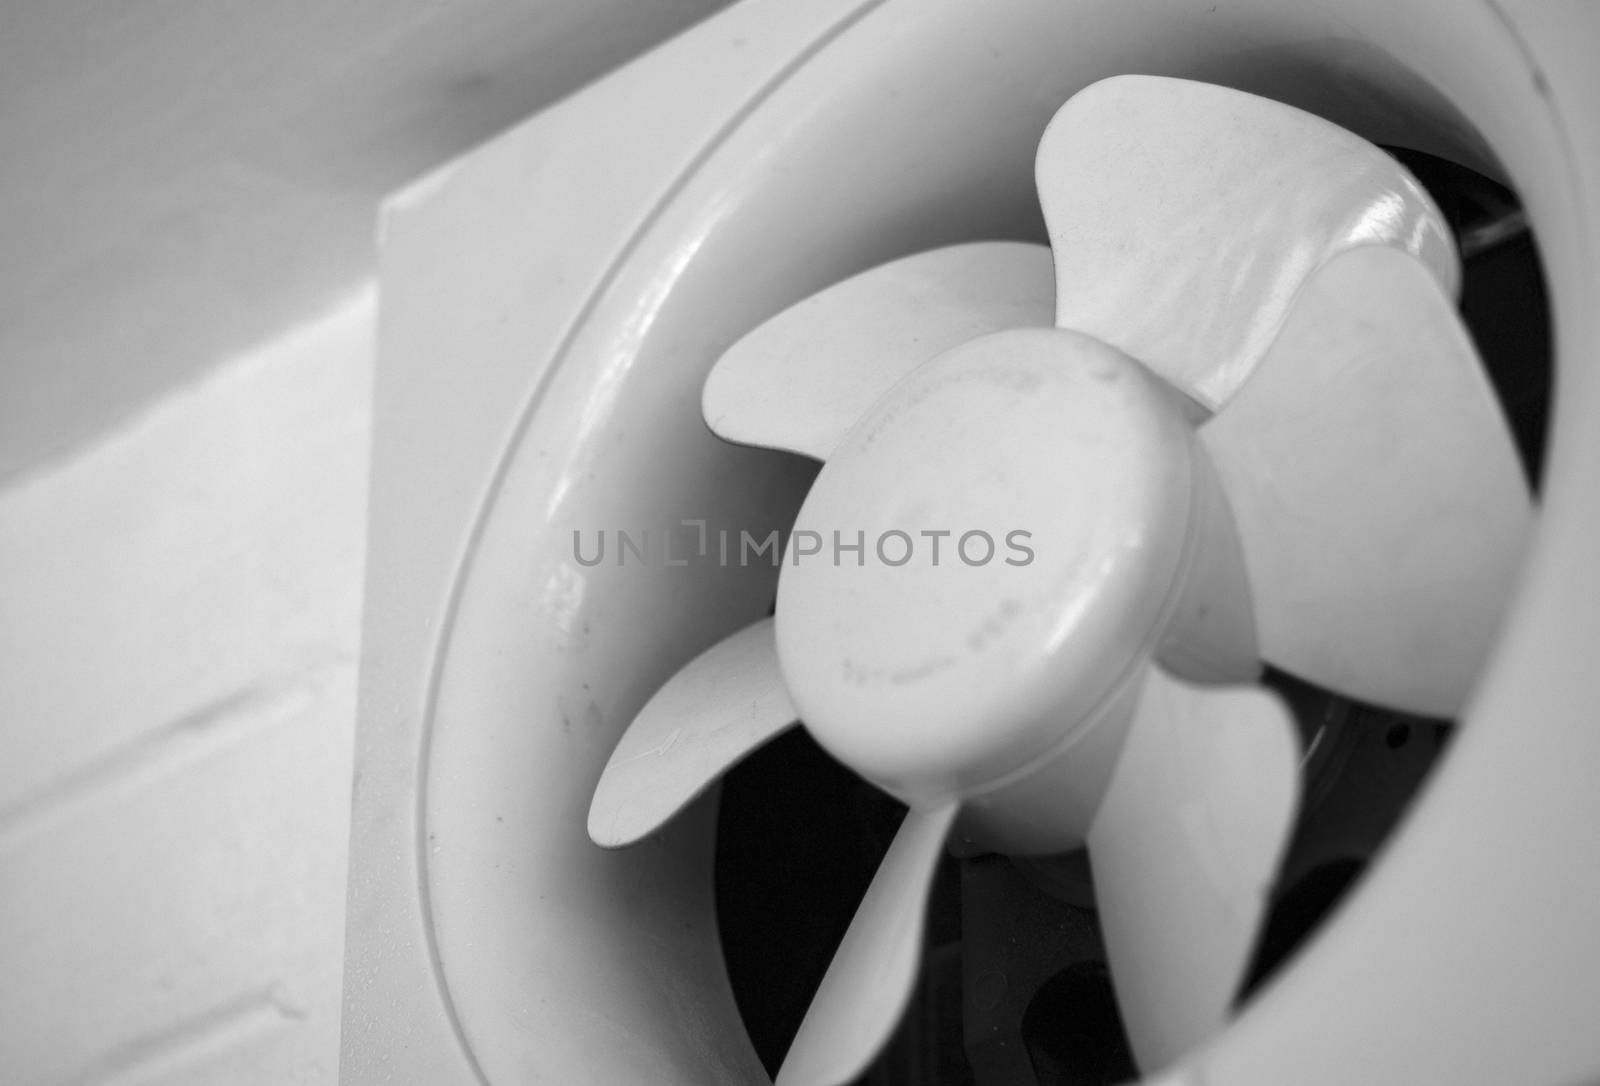 BLACK AND WHITE PHOTO OF EXHAUST FAN MOUNTED ON WALL